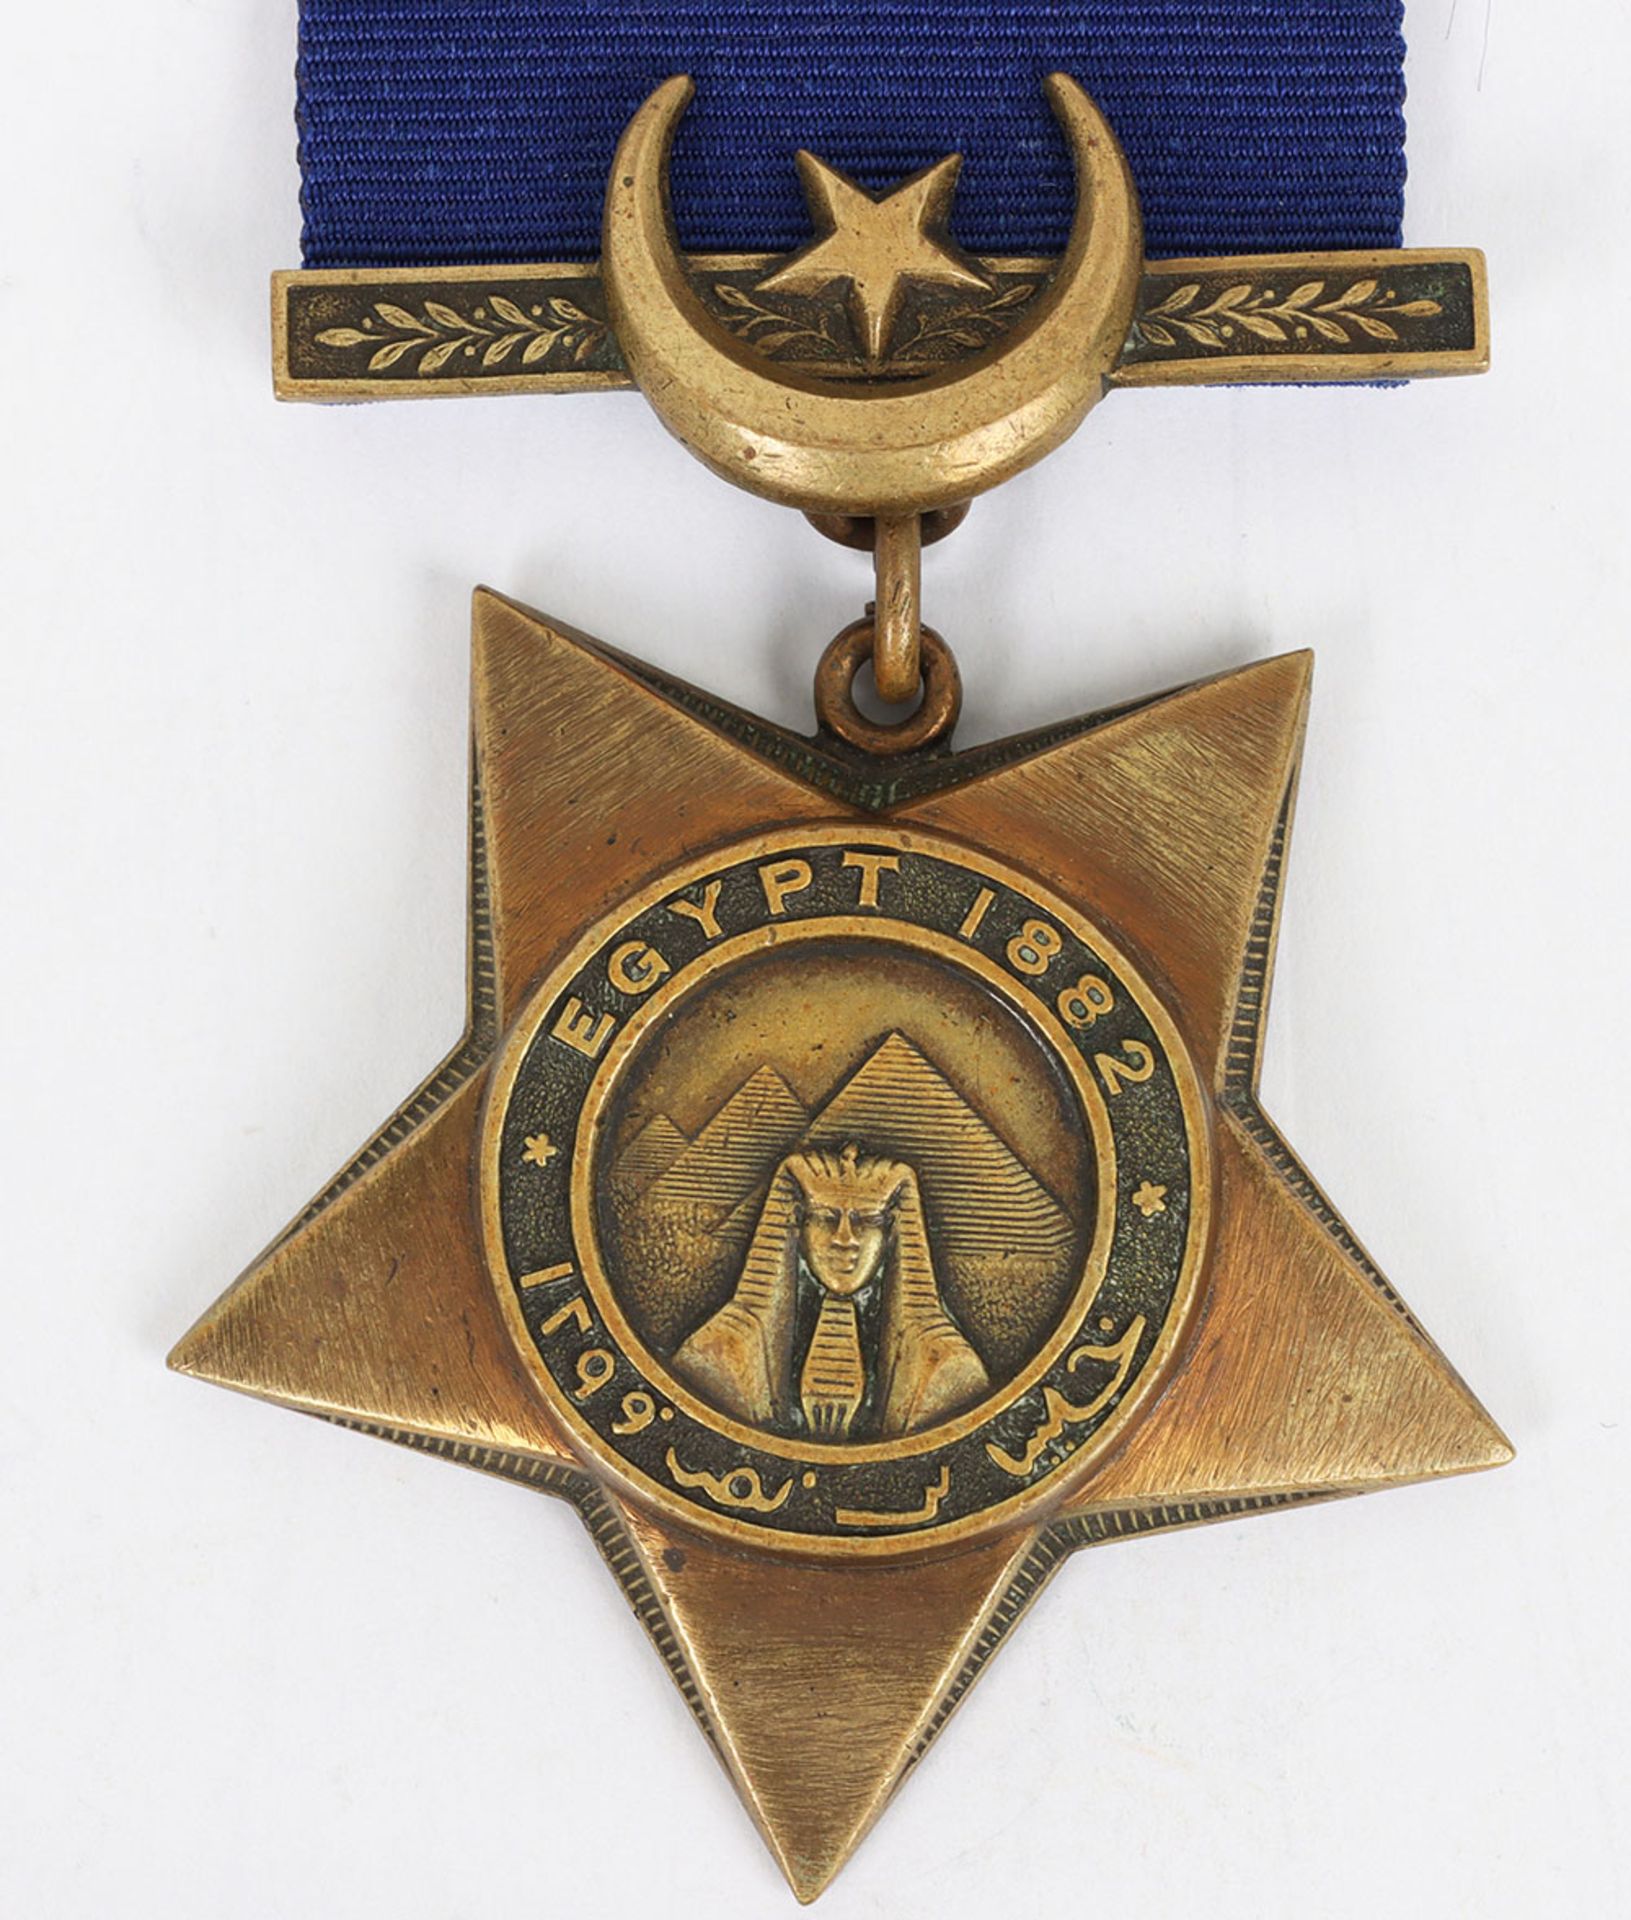 Khedives Star to the Seaforth Highlanders - Image 2 of 4